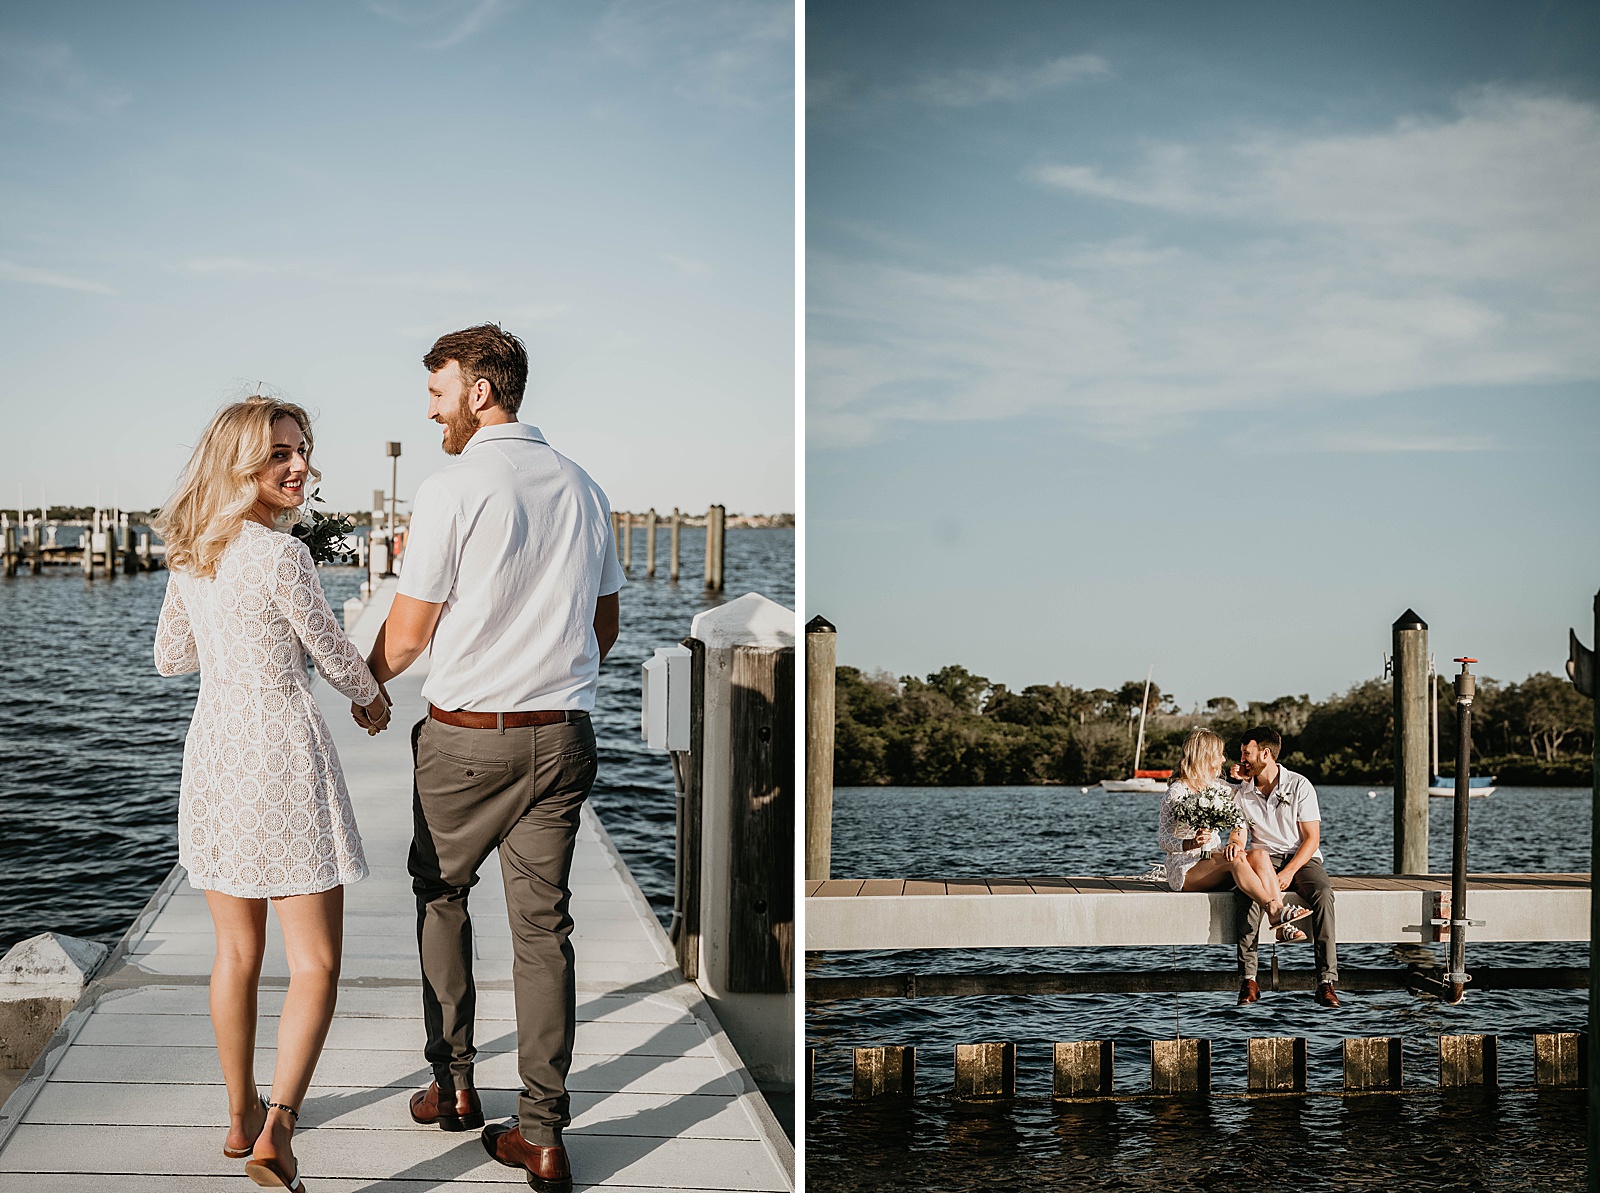 South Florida Waterfront Elopement bride and groom portrait captured by South Florida Elopement Photographer, Krystal Capone Photography